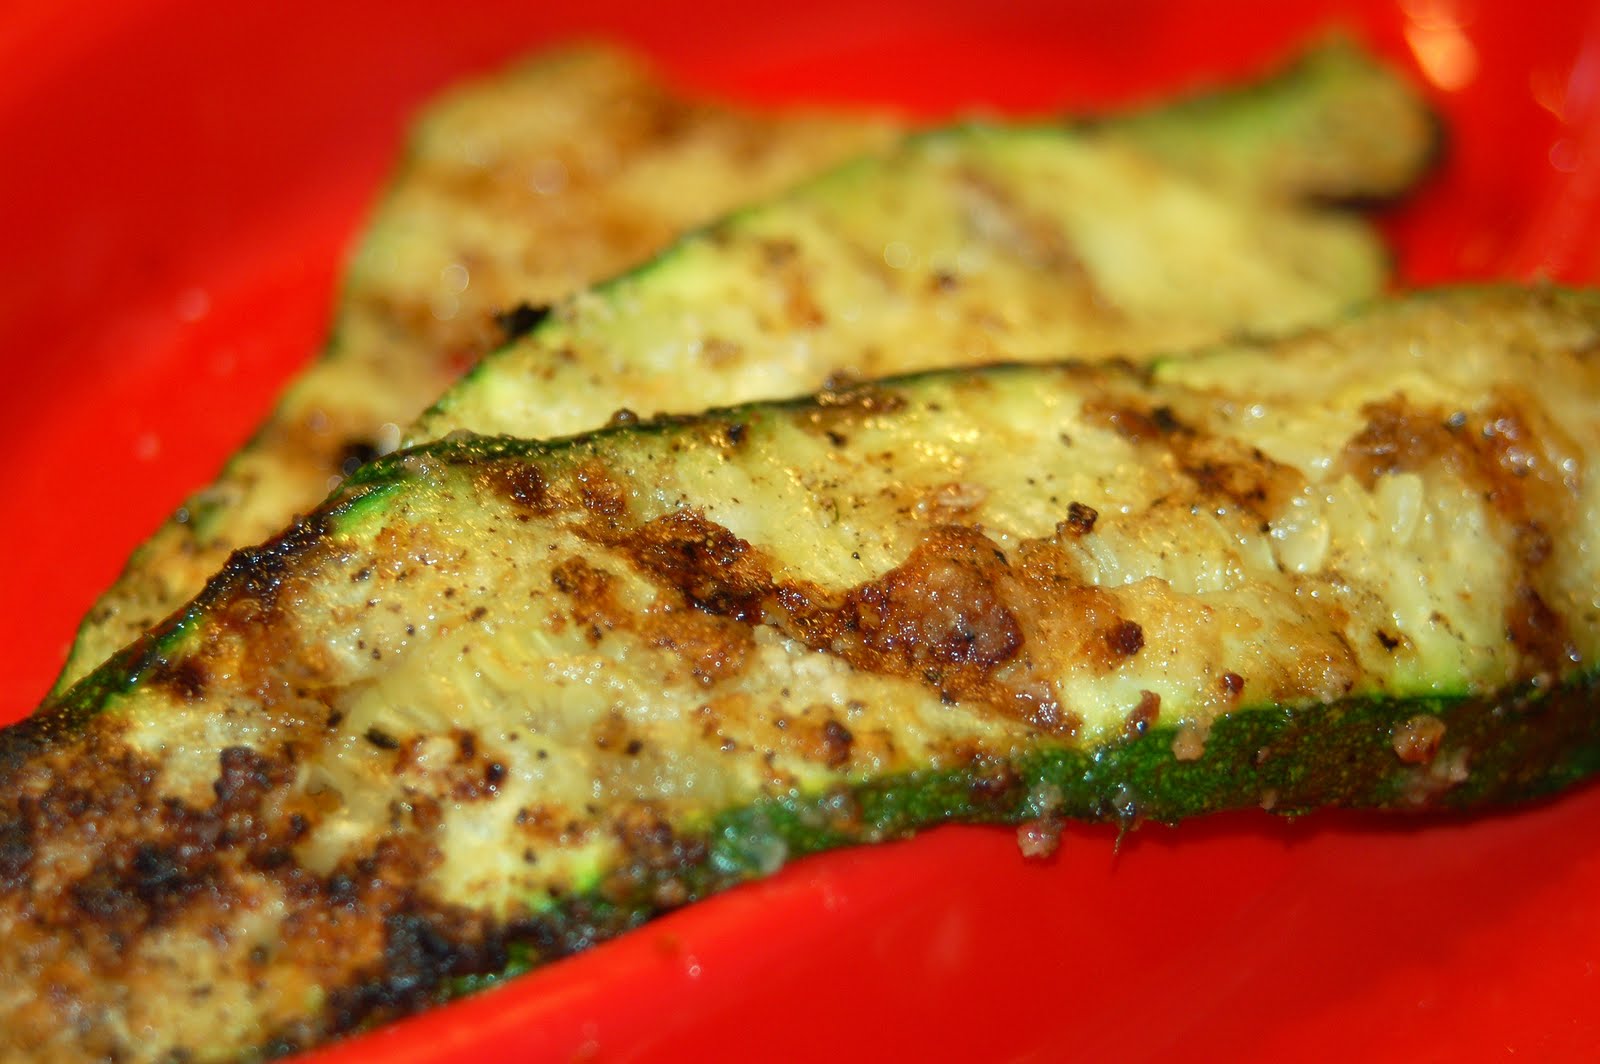 THE SERENDIPITY BISTRO: Grilled Zucchini Parmesan